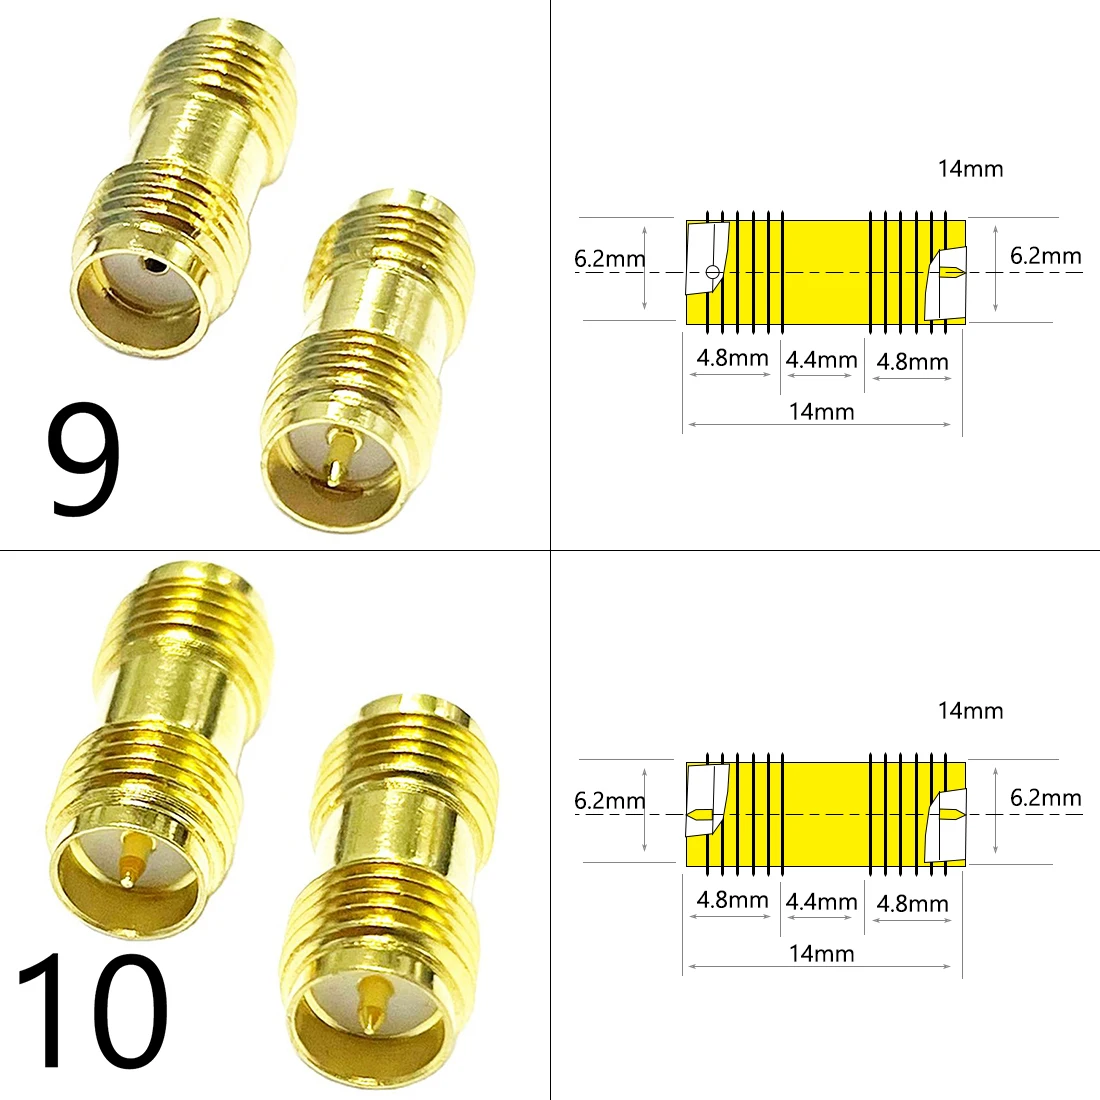 DexMRtiC 1PC SMA Male / Female RF Coax Adapter Connector Straight Right Angle T Type Splitter Goldplated NEW Wholesale images - 6